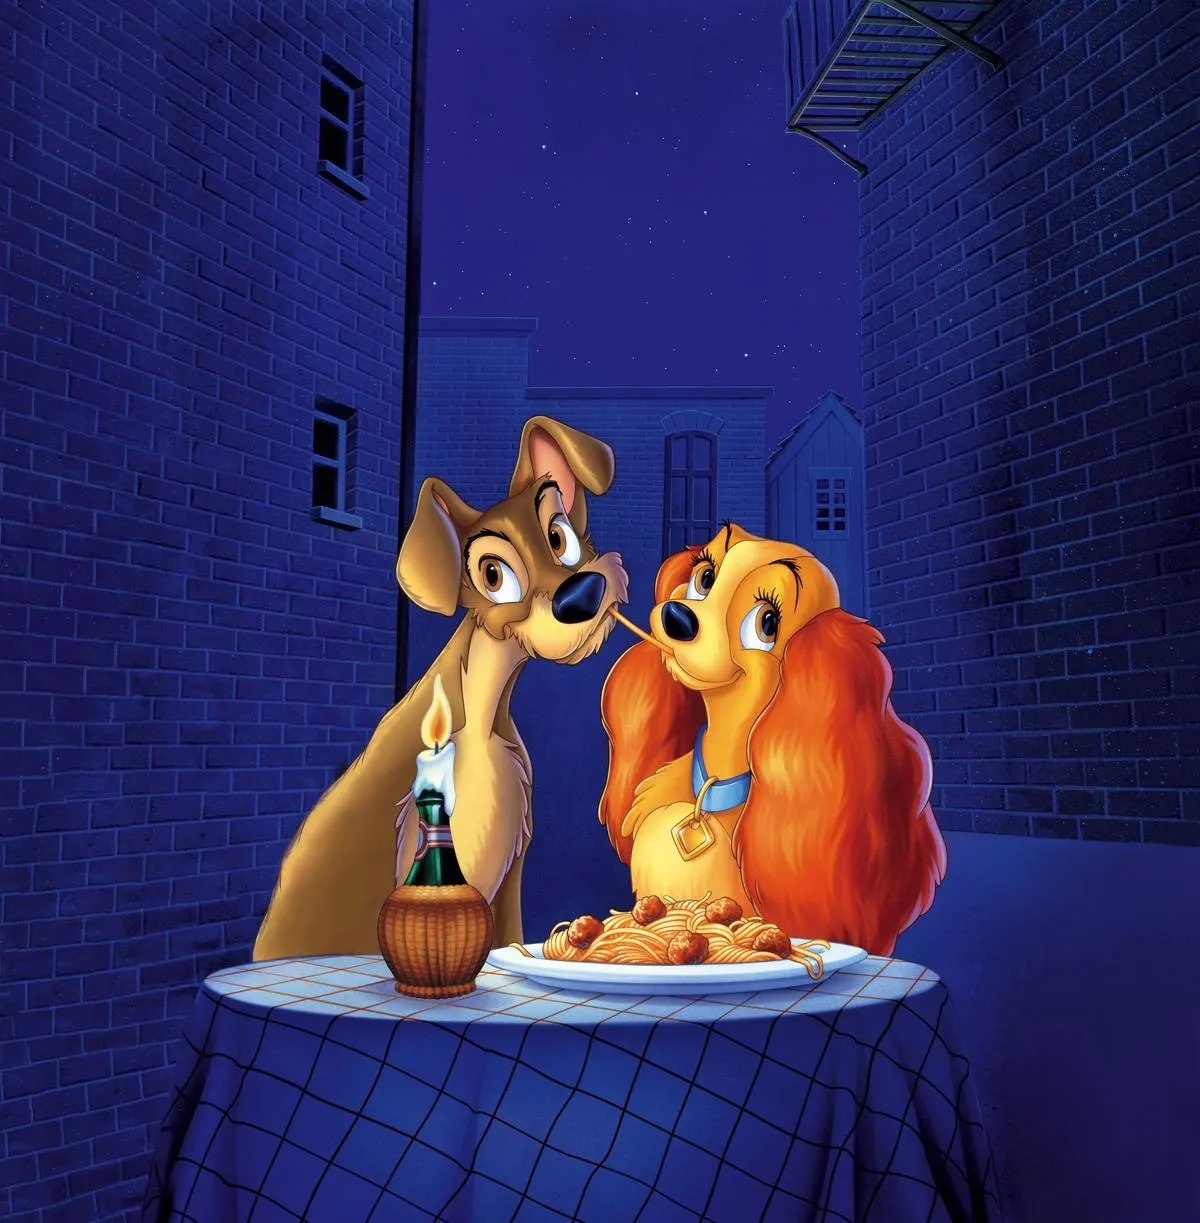 Lady And The Tramp Sharing A Plate Of Spaghetti